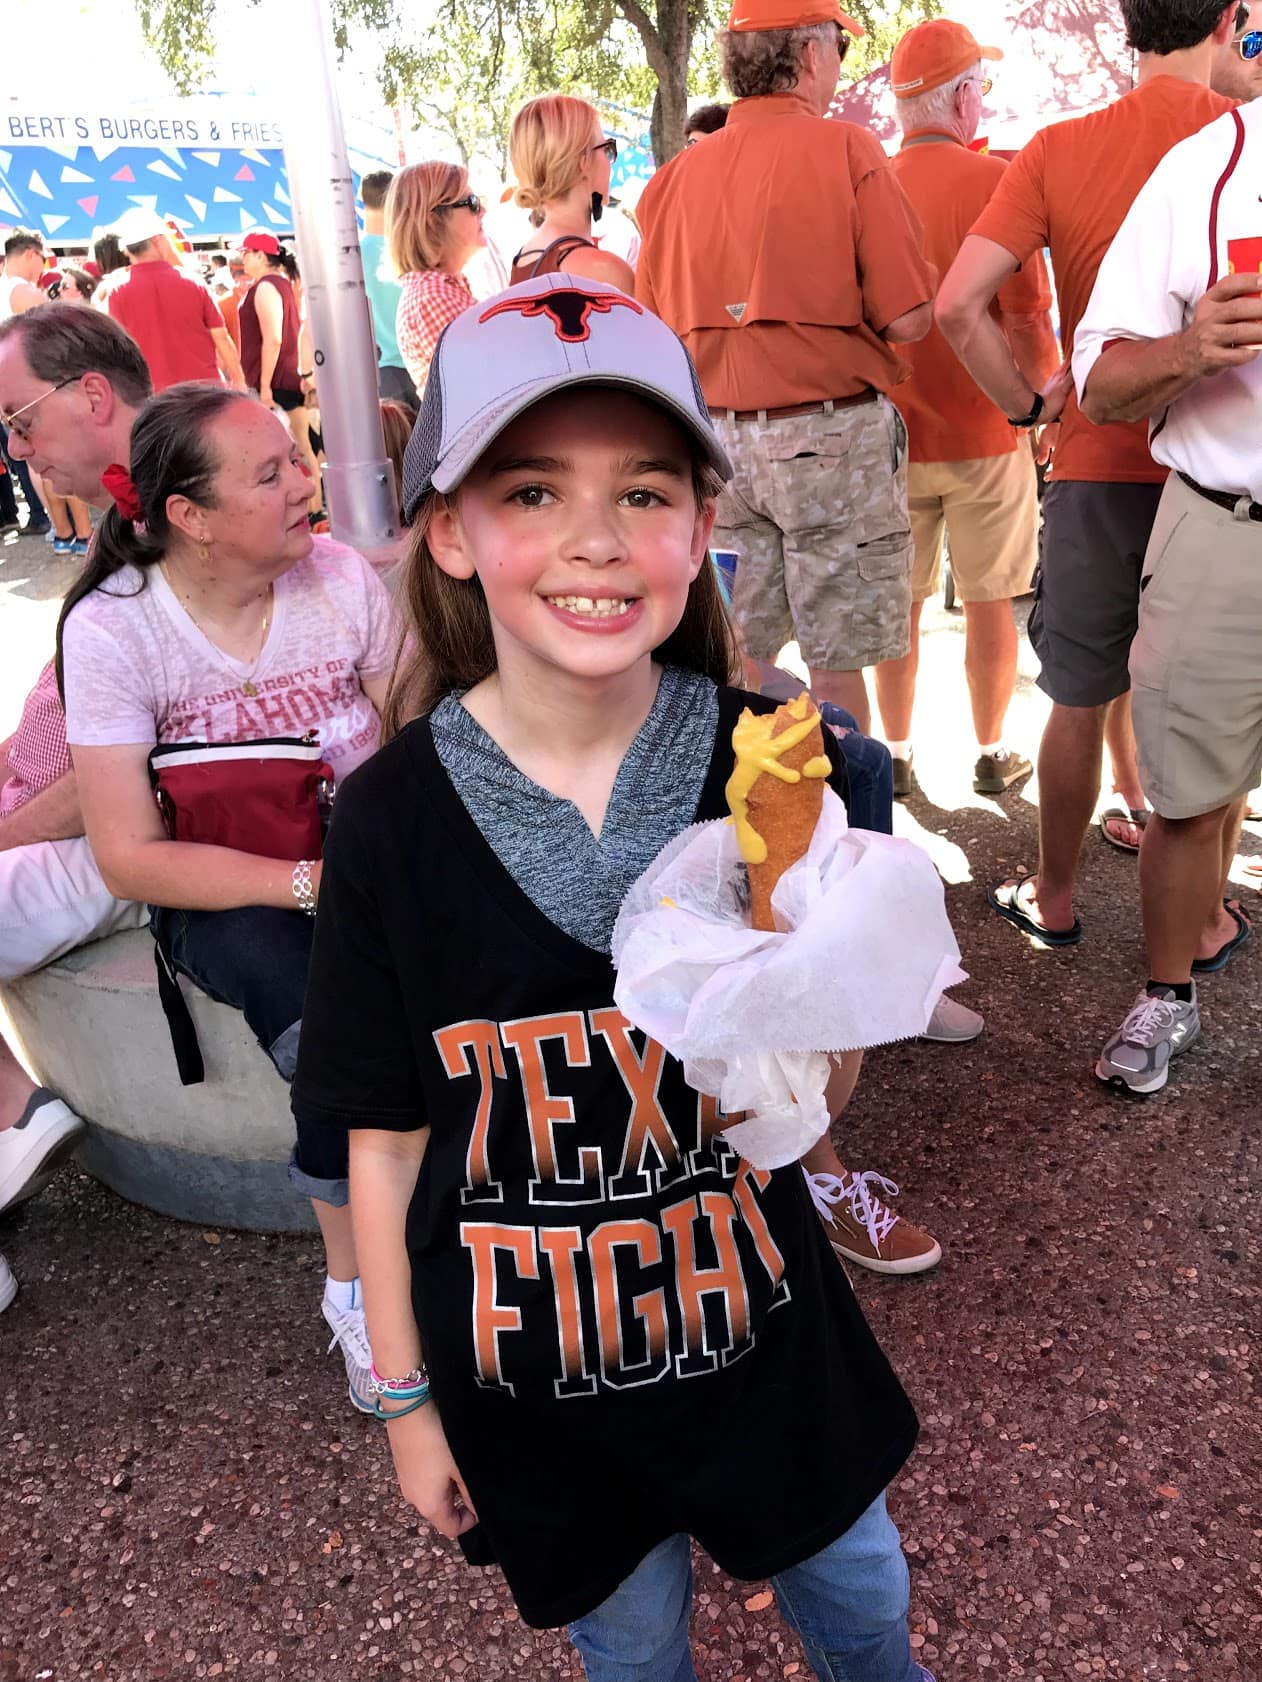 Child eating a Fletcher corny dog at State Fair of Texas